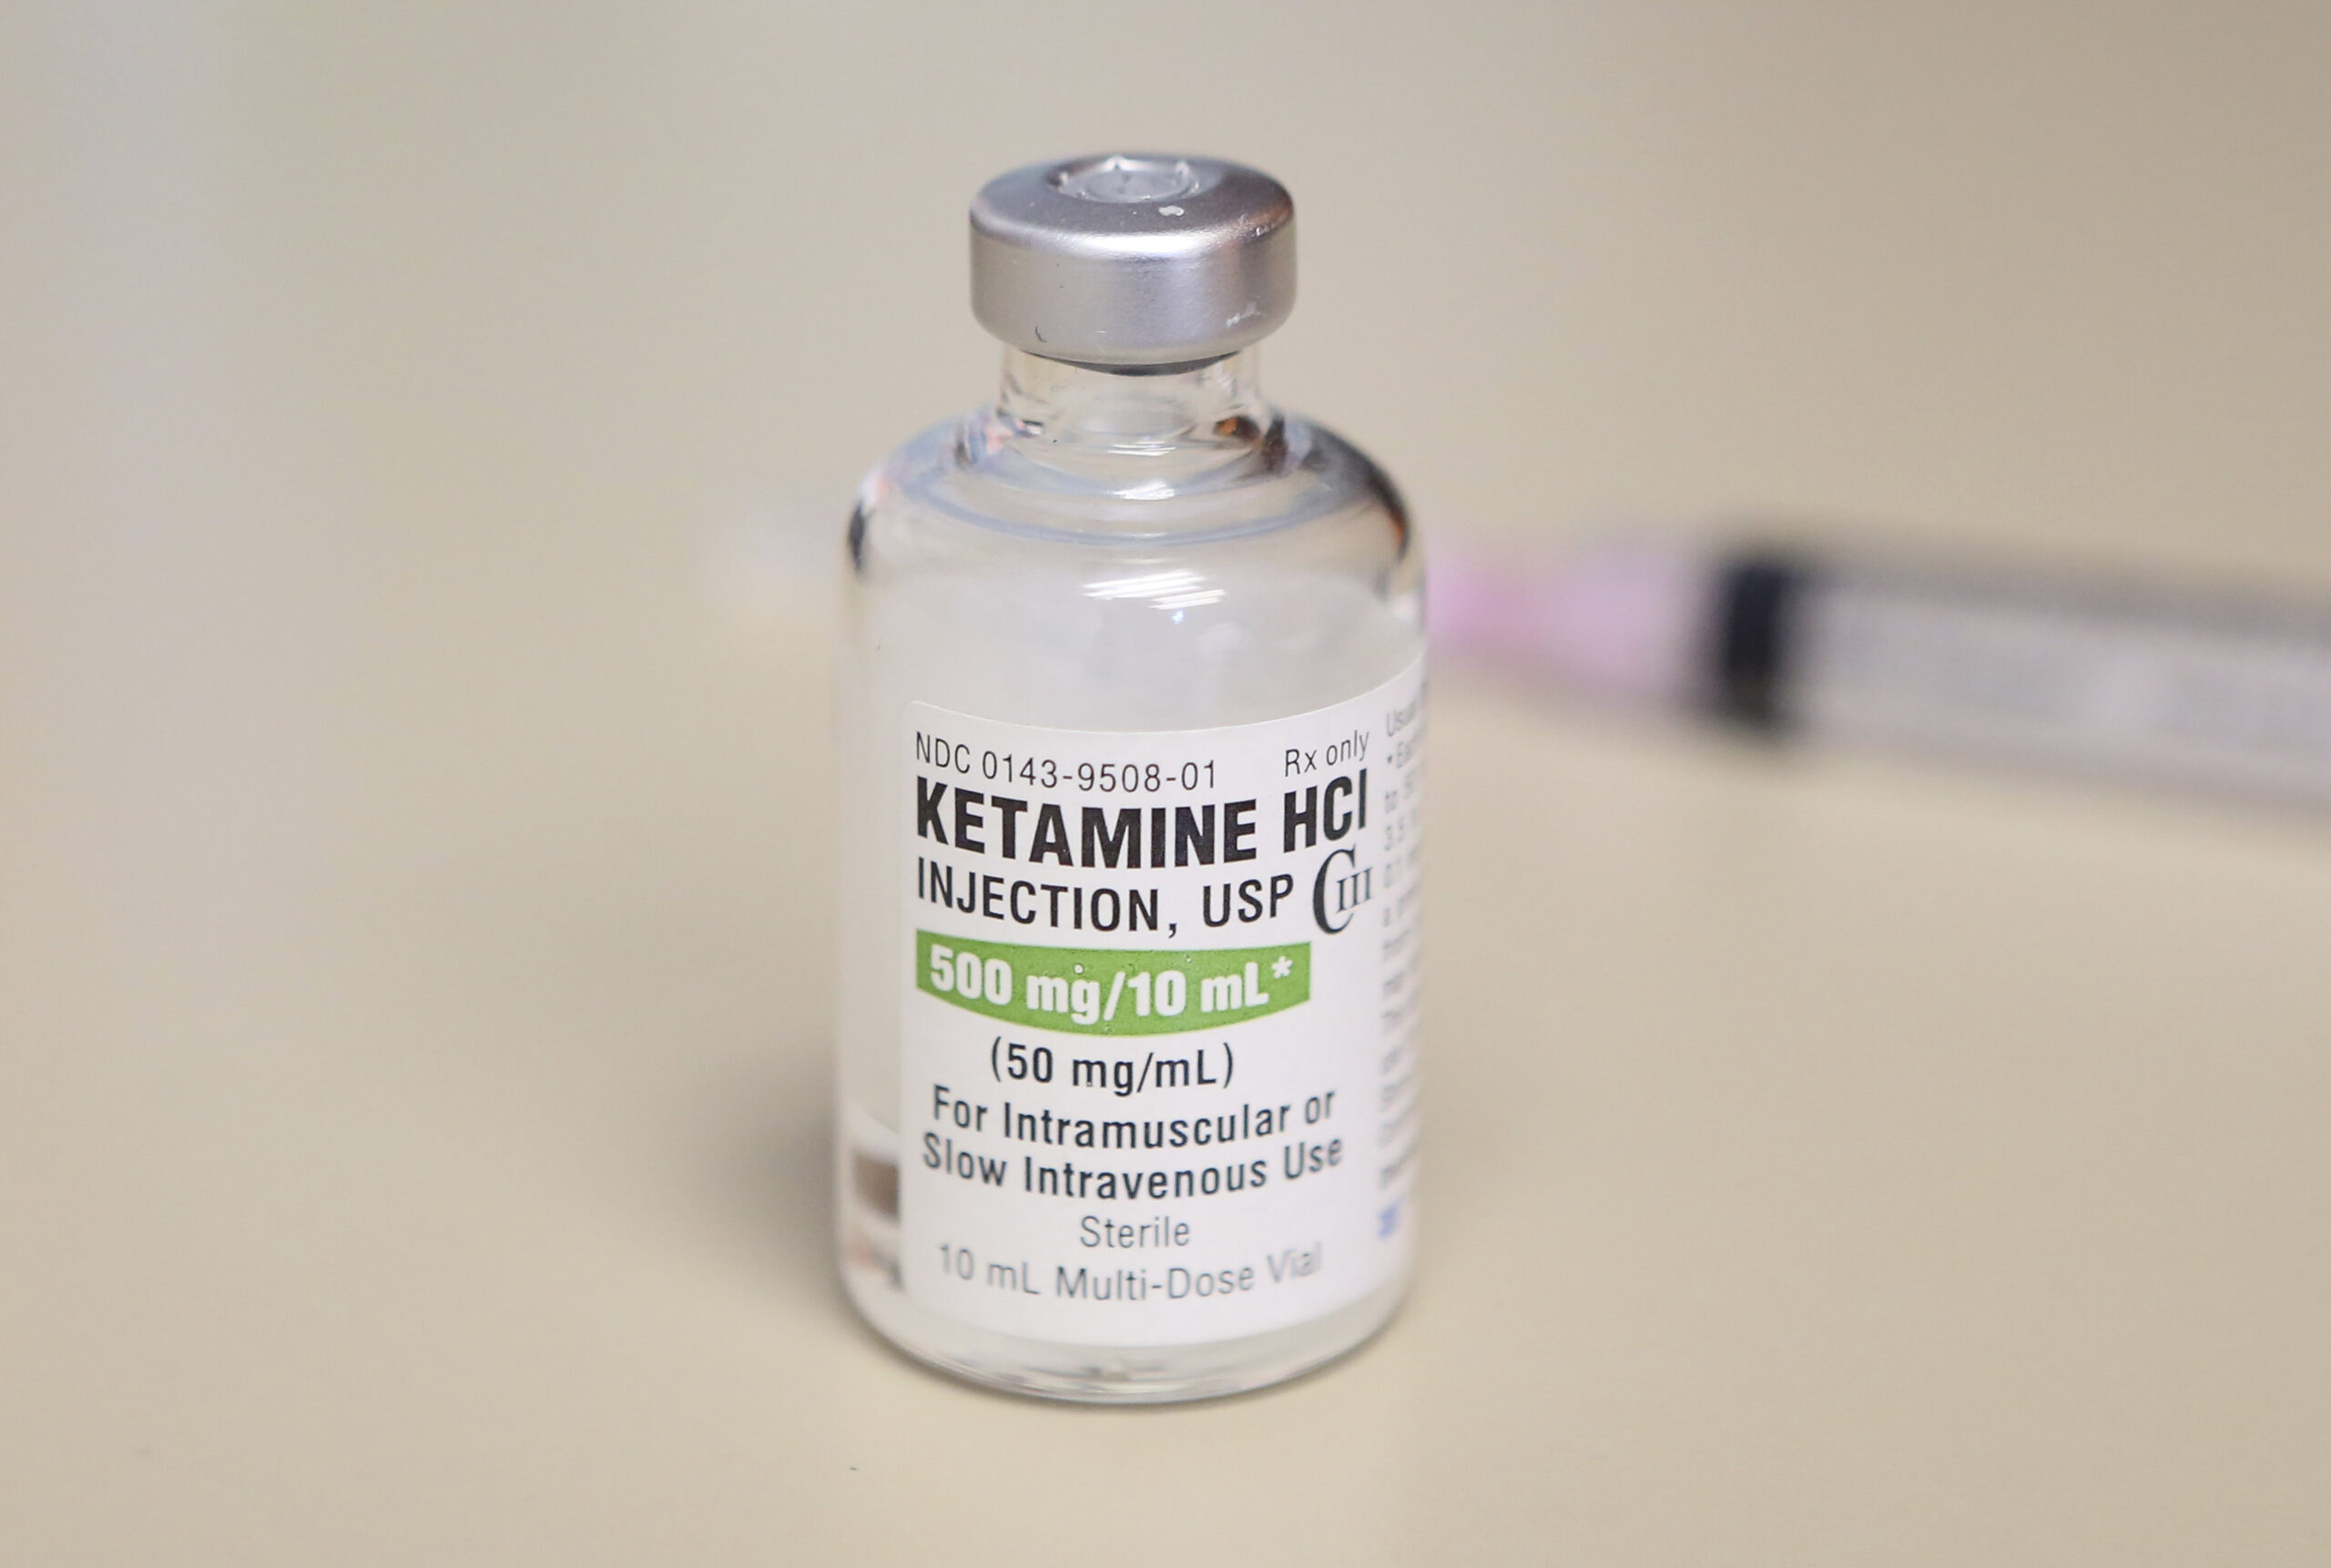 A vial of ketamine sits on a table